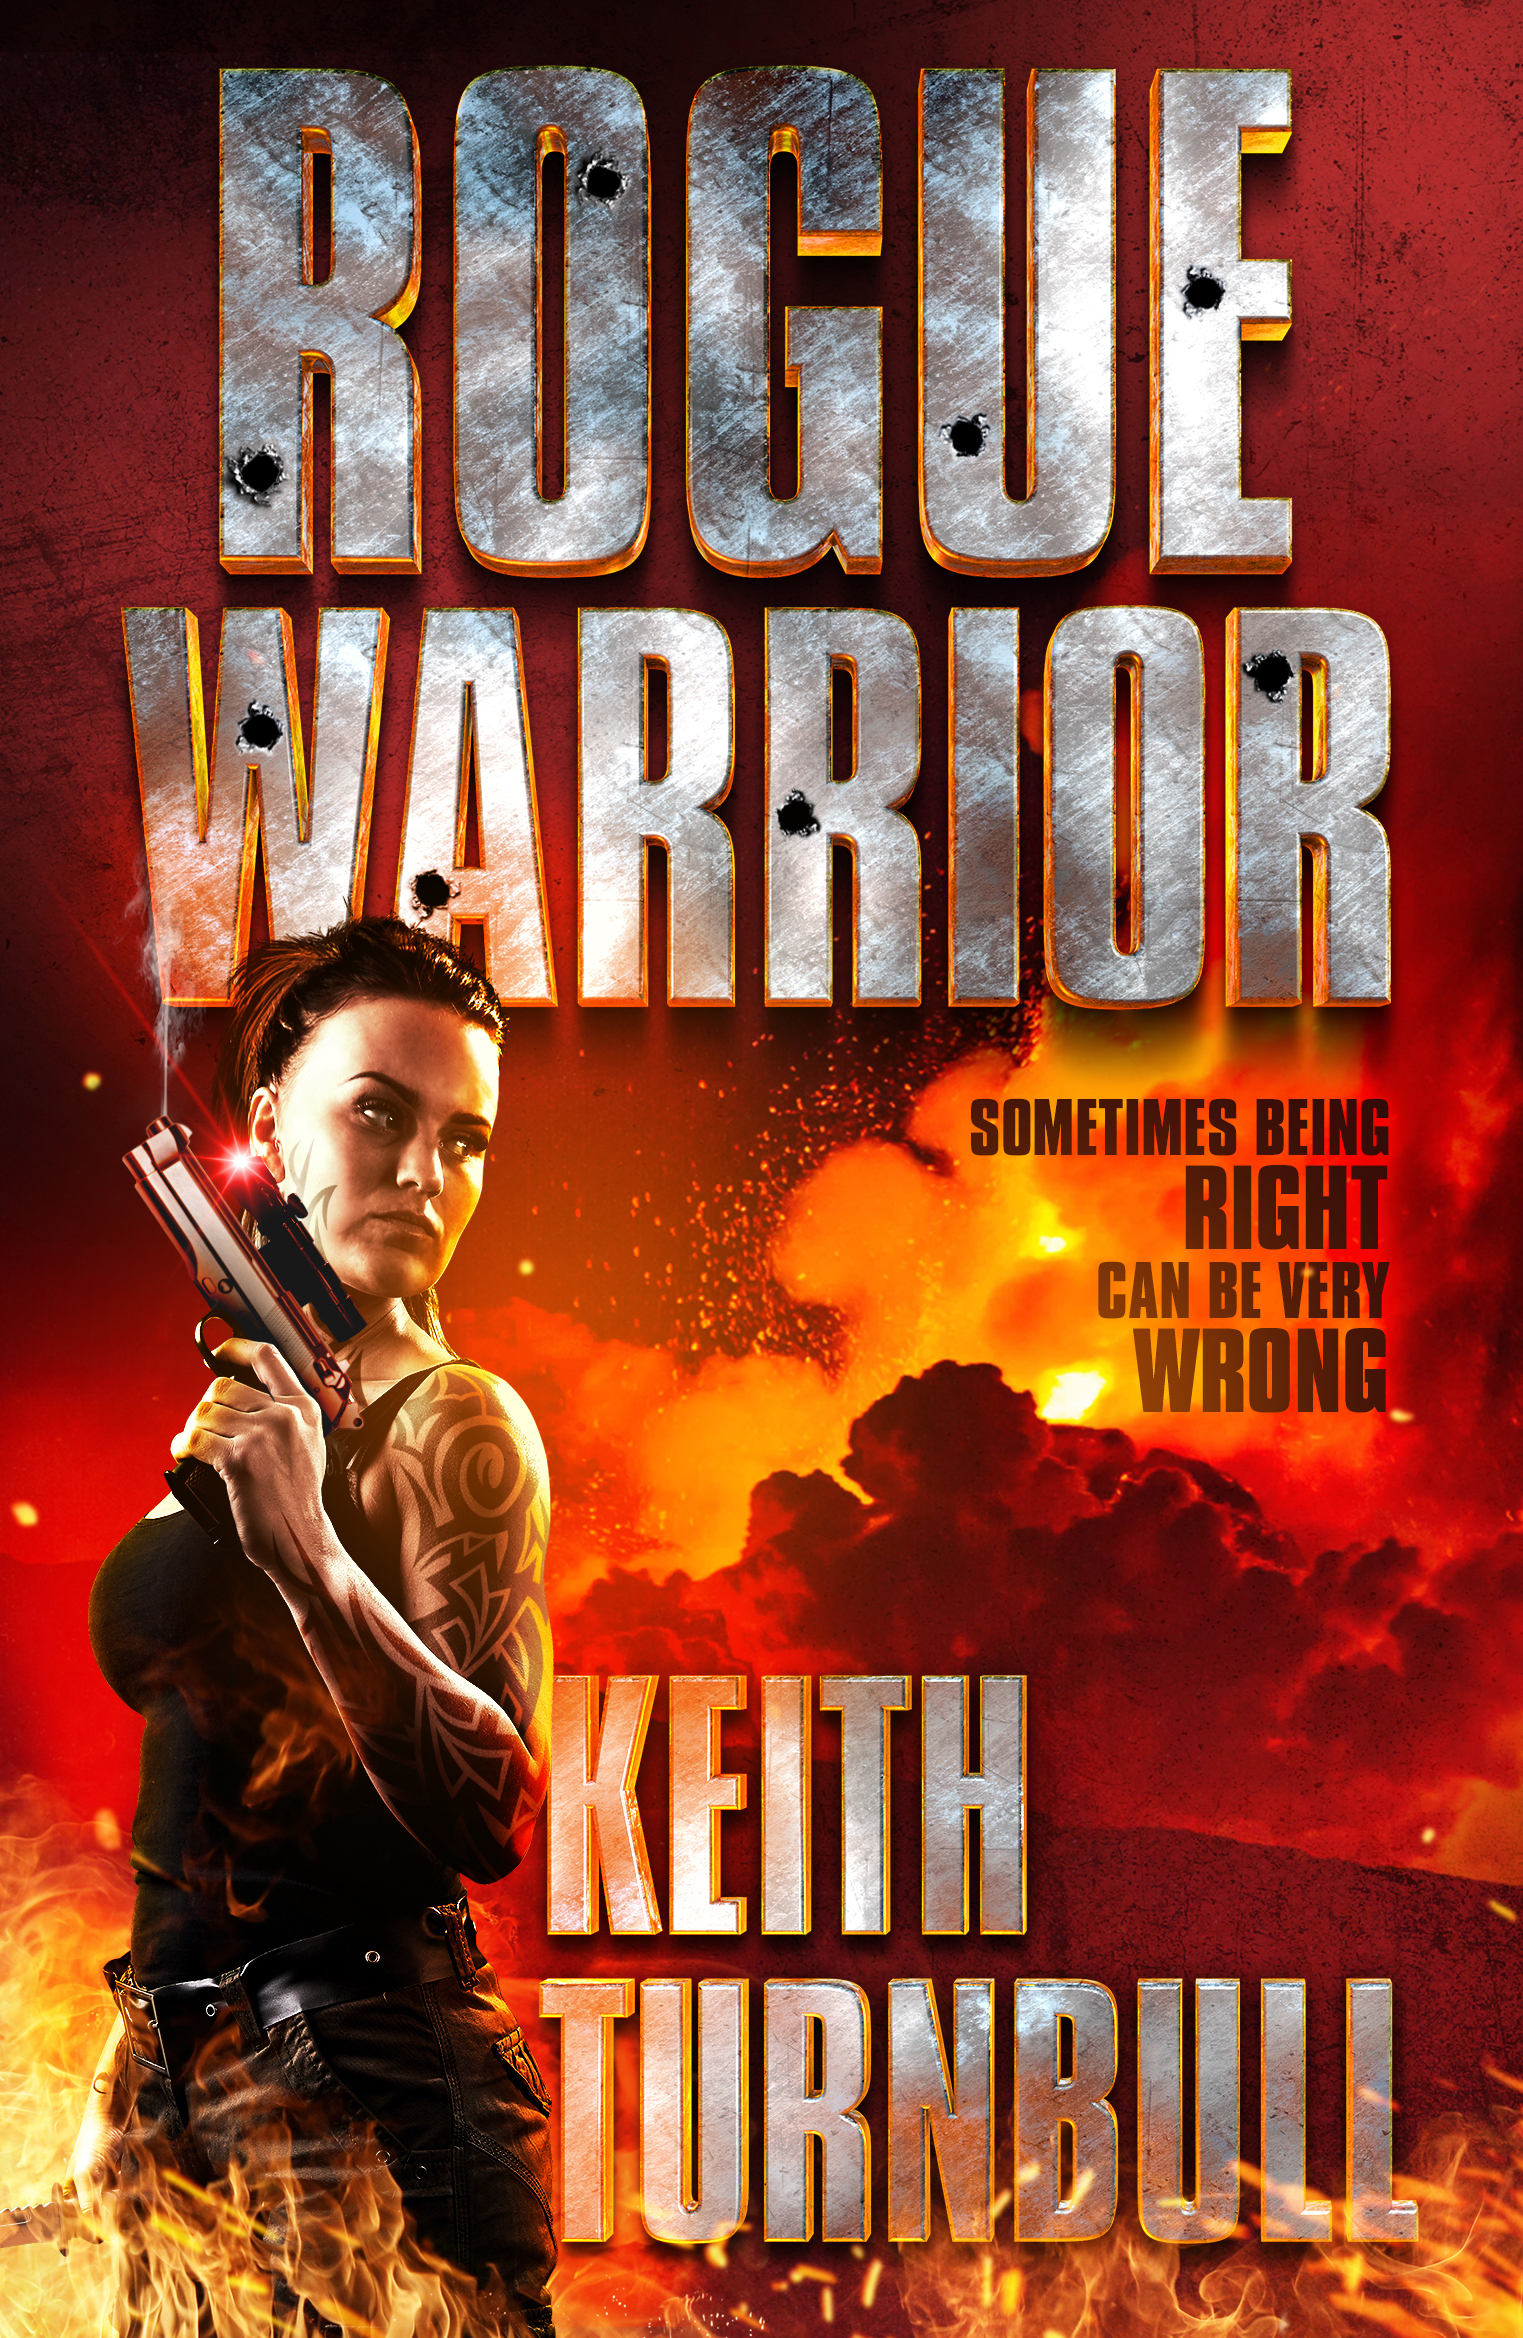 Rogue Warrior – The Book out April 30